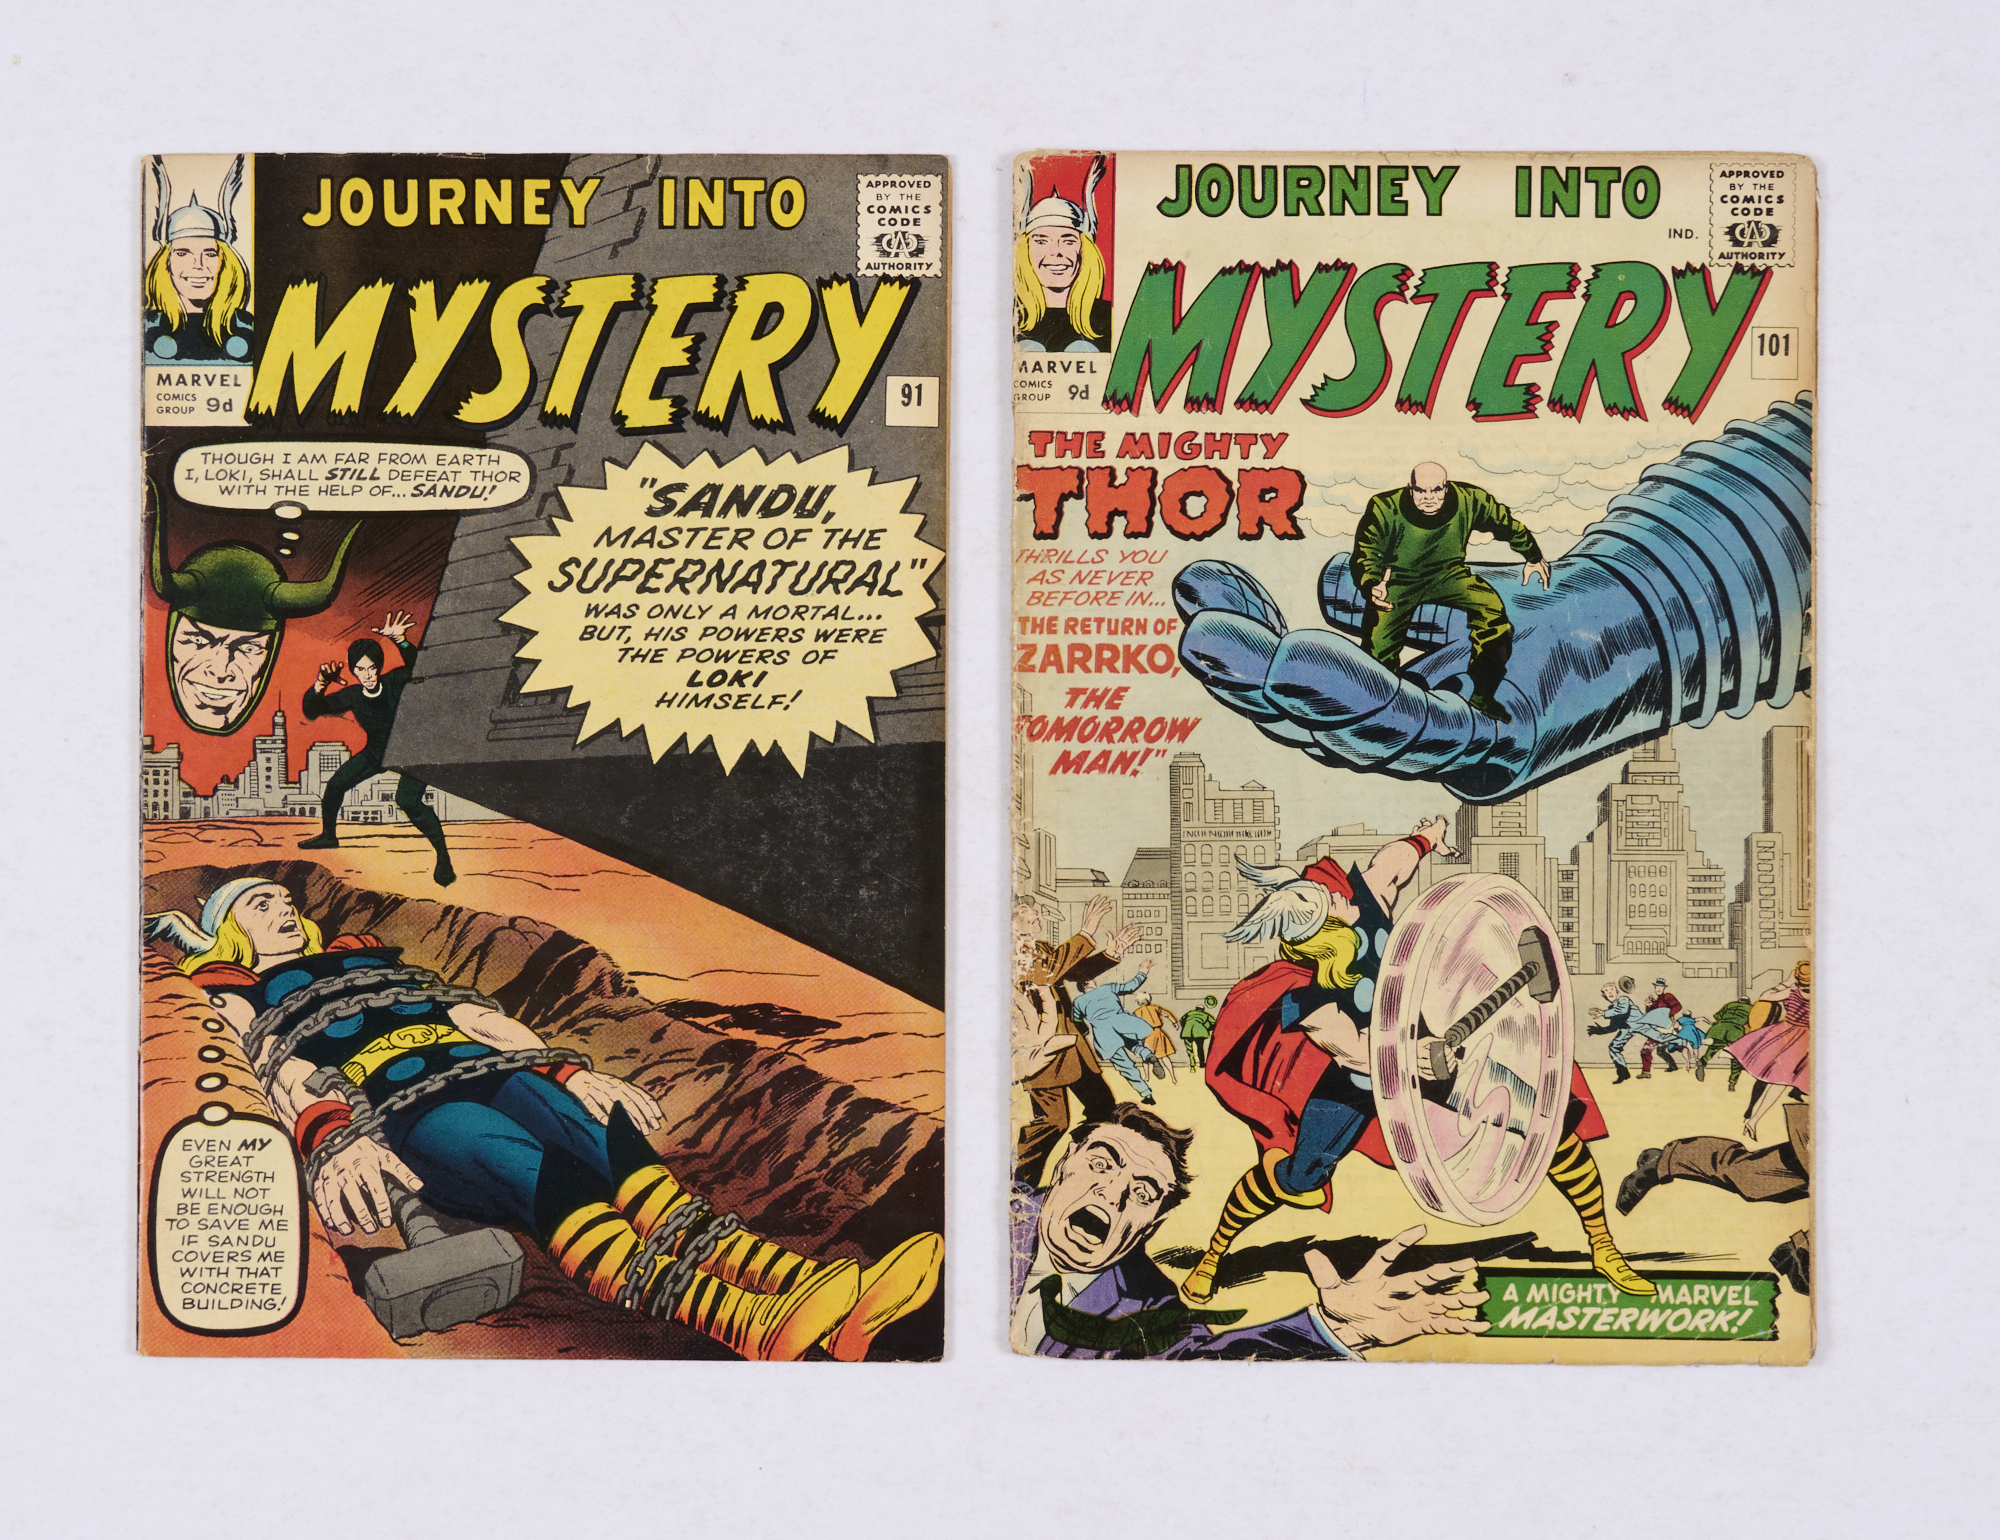 Journey Into Mystery (1963-64) 91, 101. # 91: cover off upper staple [vg-], 101 [gd] (2). No